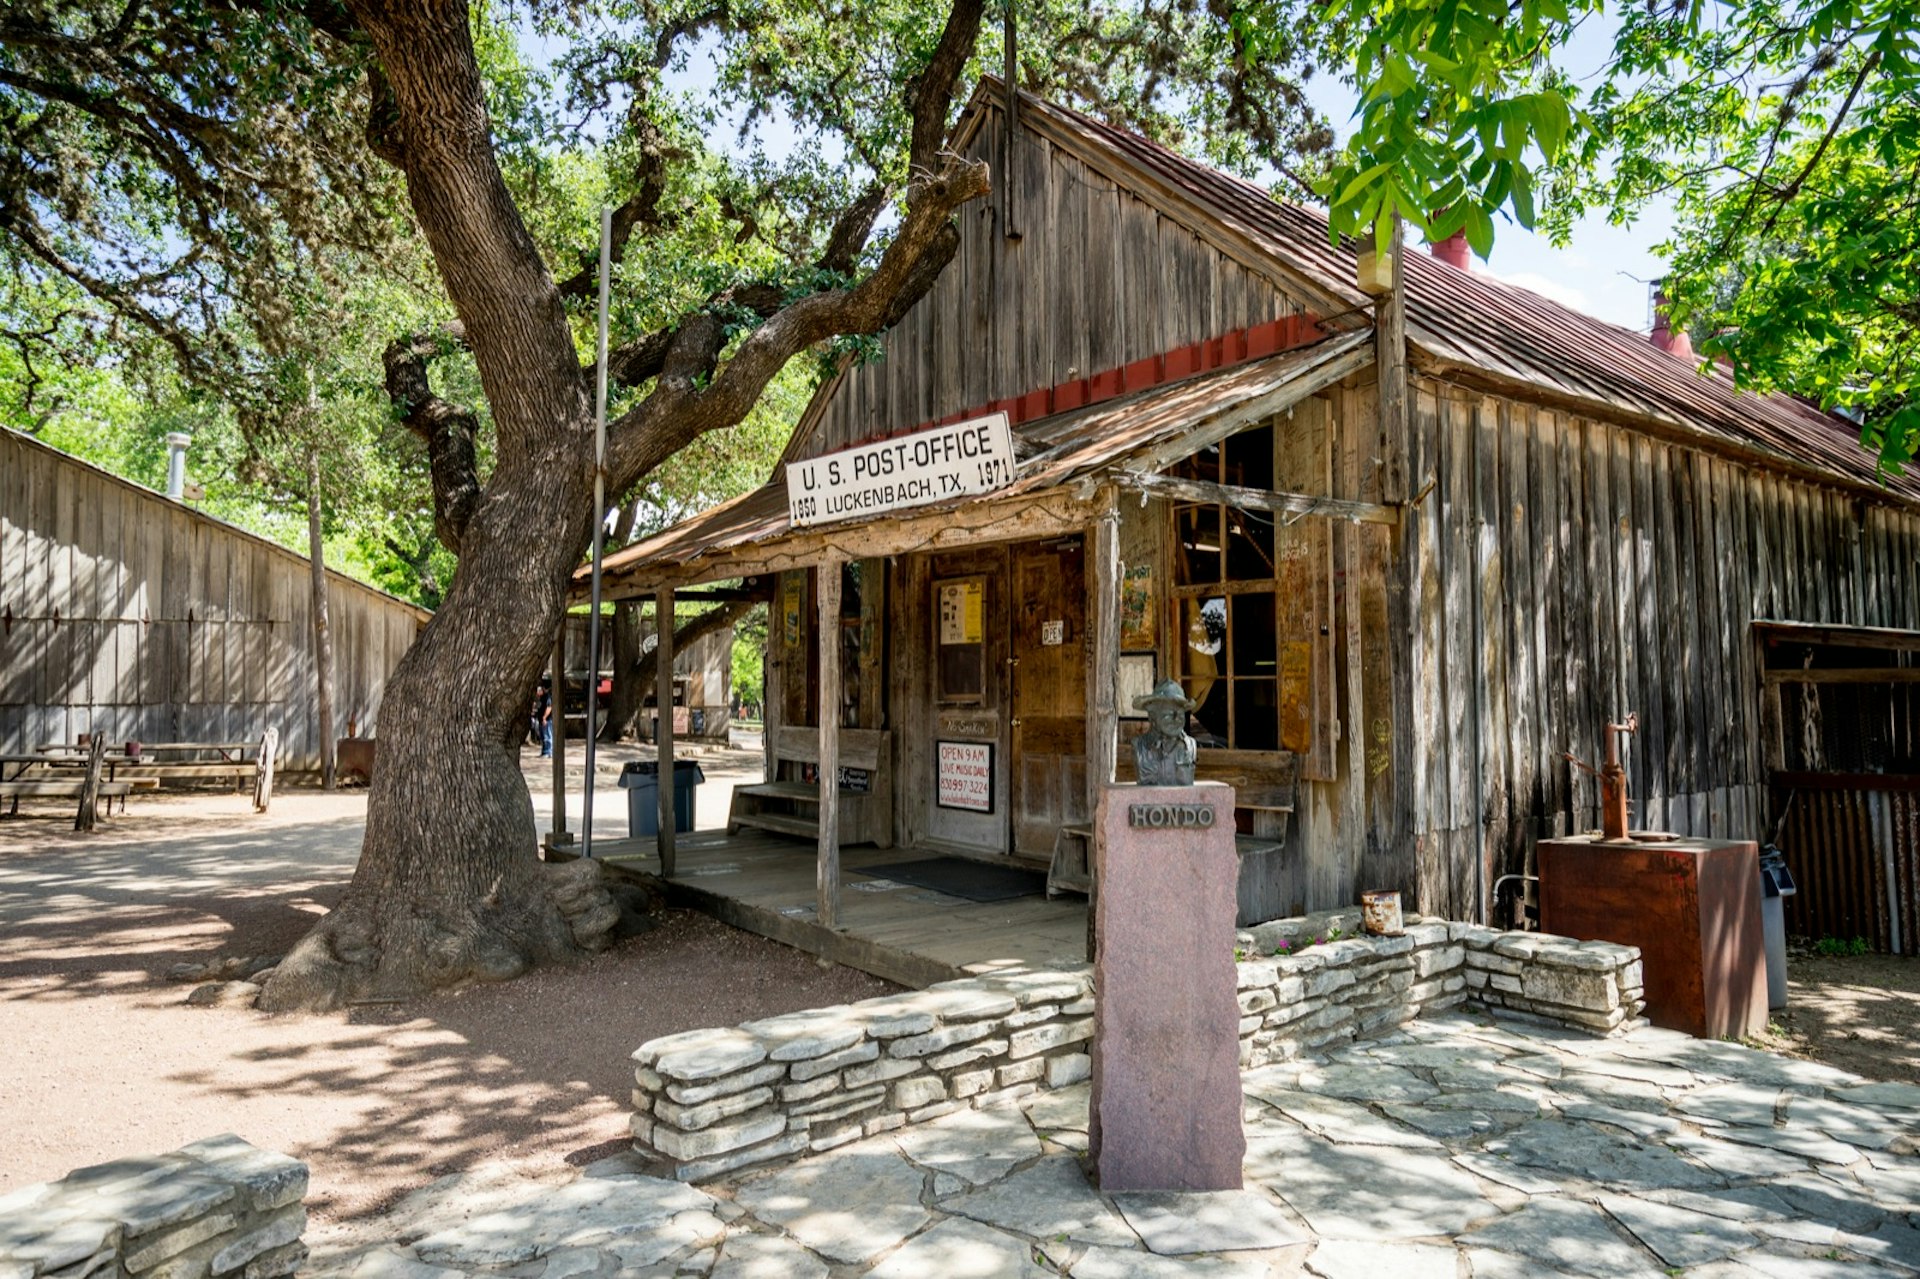 A bust sits outside an old-fashioned looking building with a large tree encroaching on it in the Hill Country